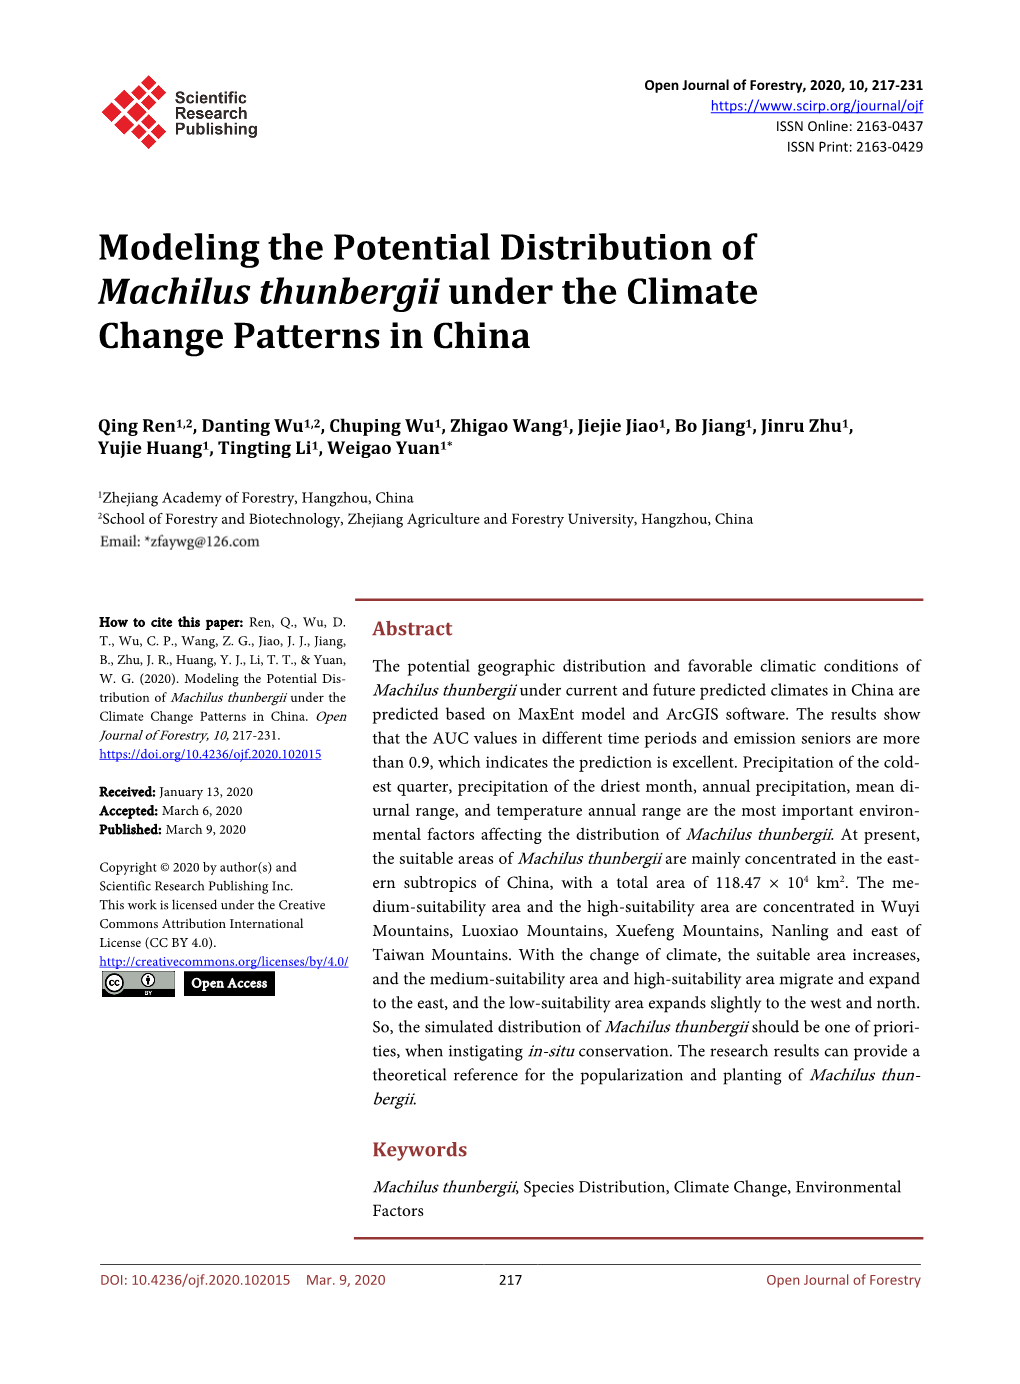 Modeling the Potential Distribution of Machilus Thunbergii Under the Climate Change Patterns in China